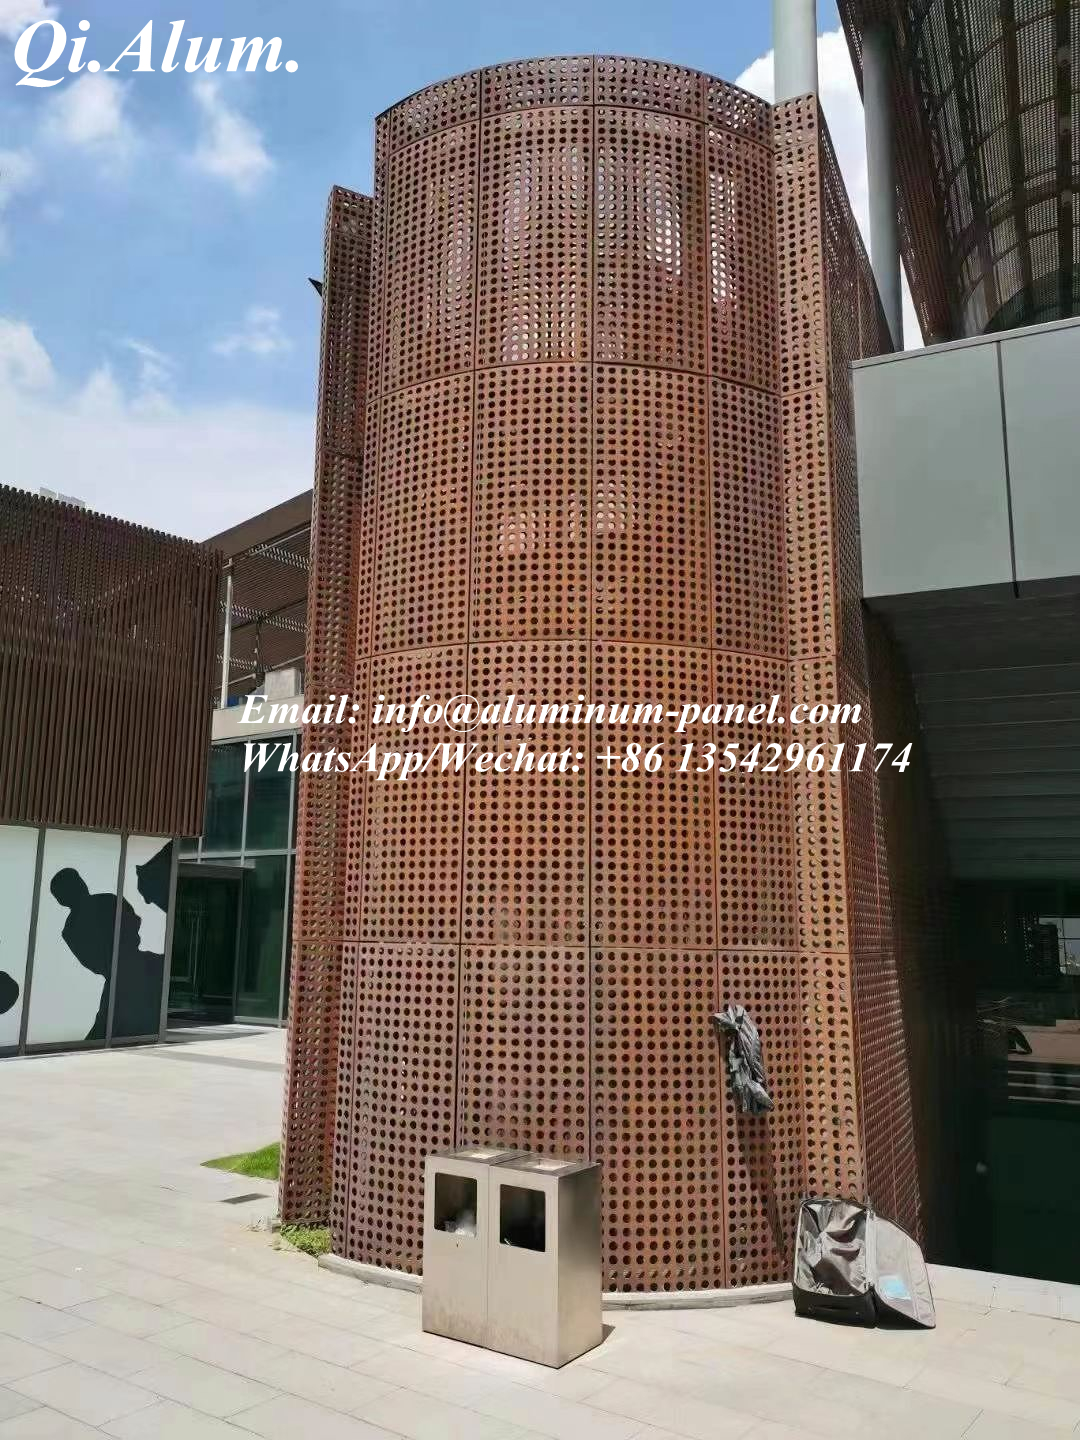 Brown aluminum punching panel are installed in the gallery curtain wall decoration